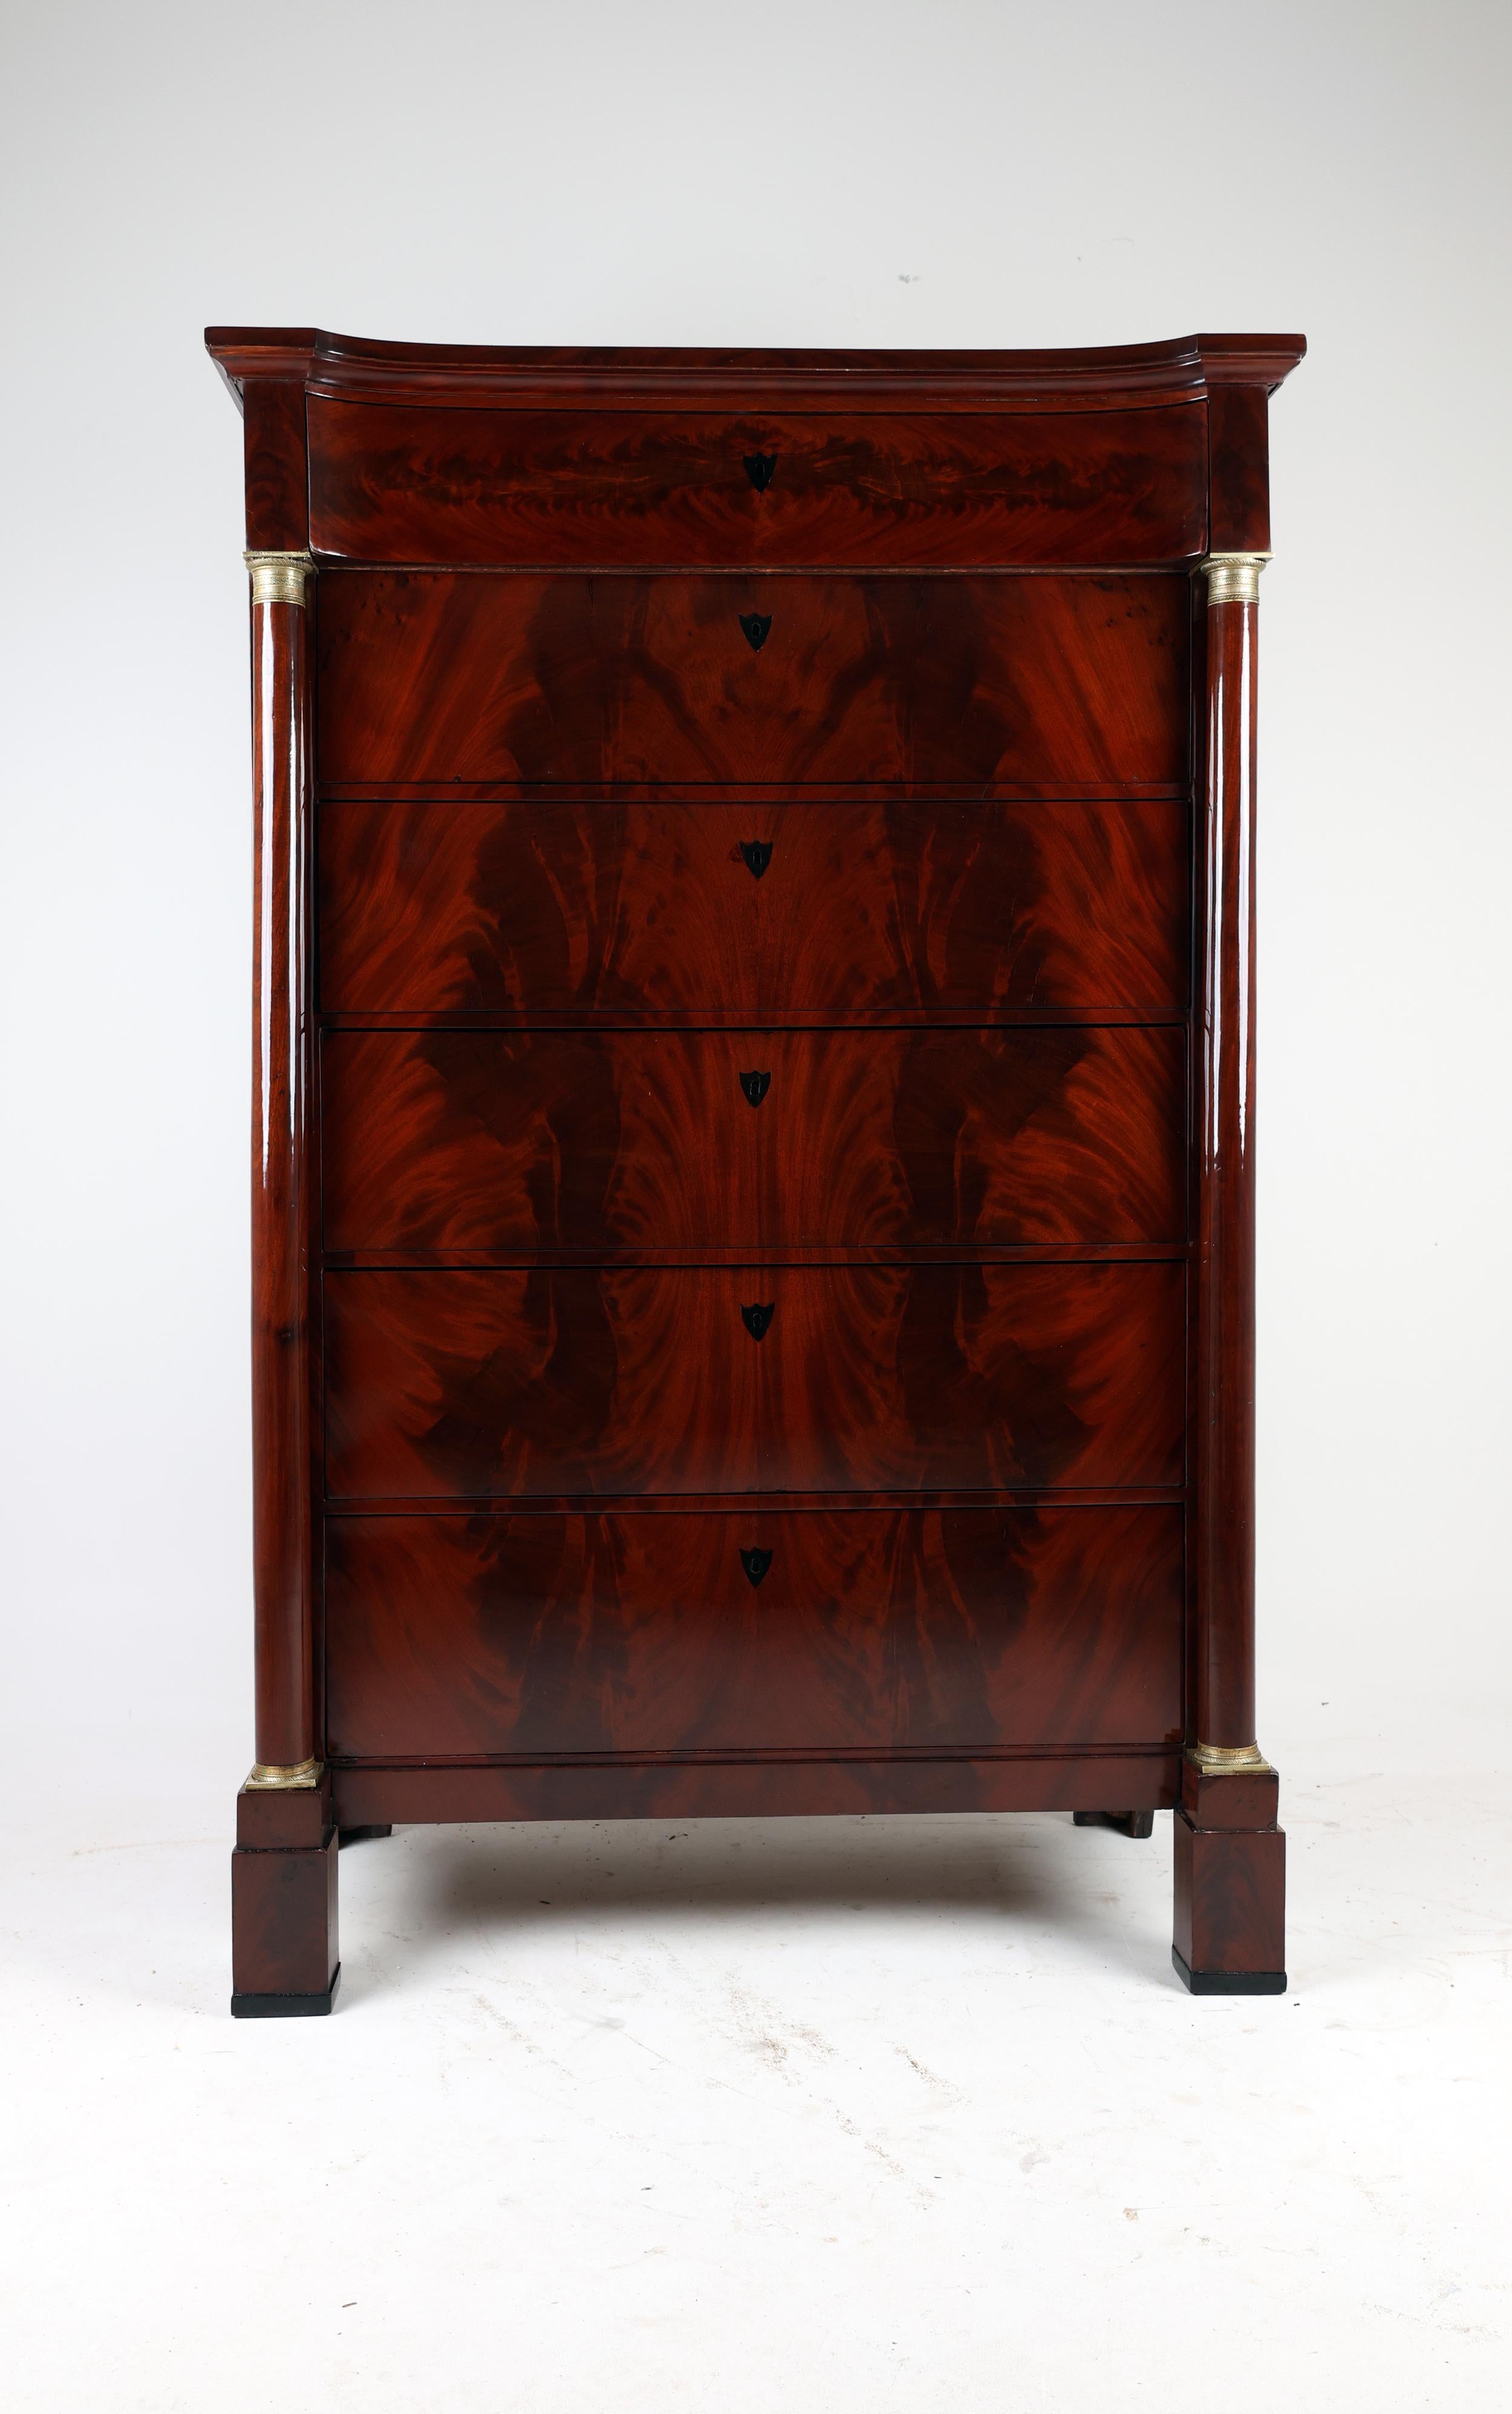 19th Century Biedermeier Tall Chest of Drawers,
1825-1830, Northern Germany
Mahogany

,,The Biedermeier period was an era in Central Europe between 1815 and 1848 during which the middle classes grew in number and the arts began to appeal to their